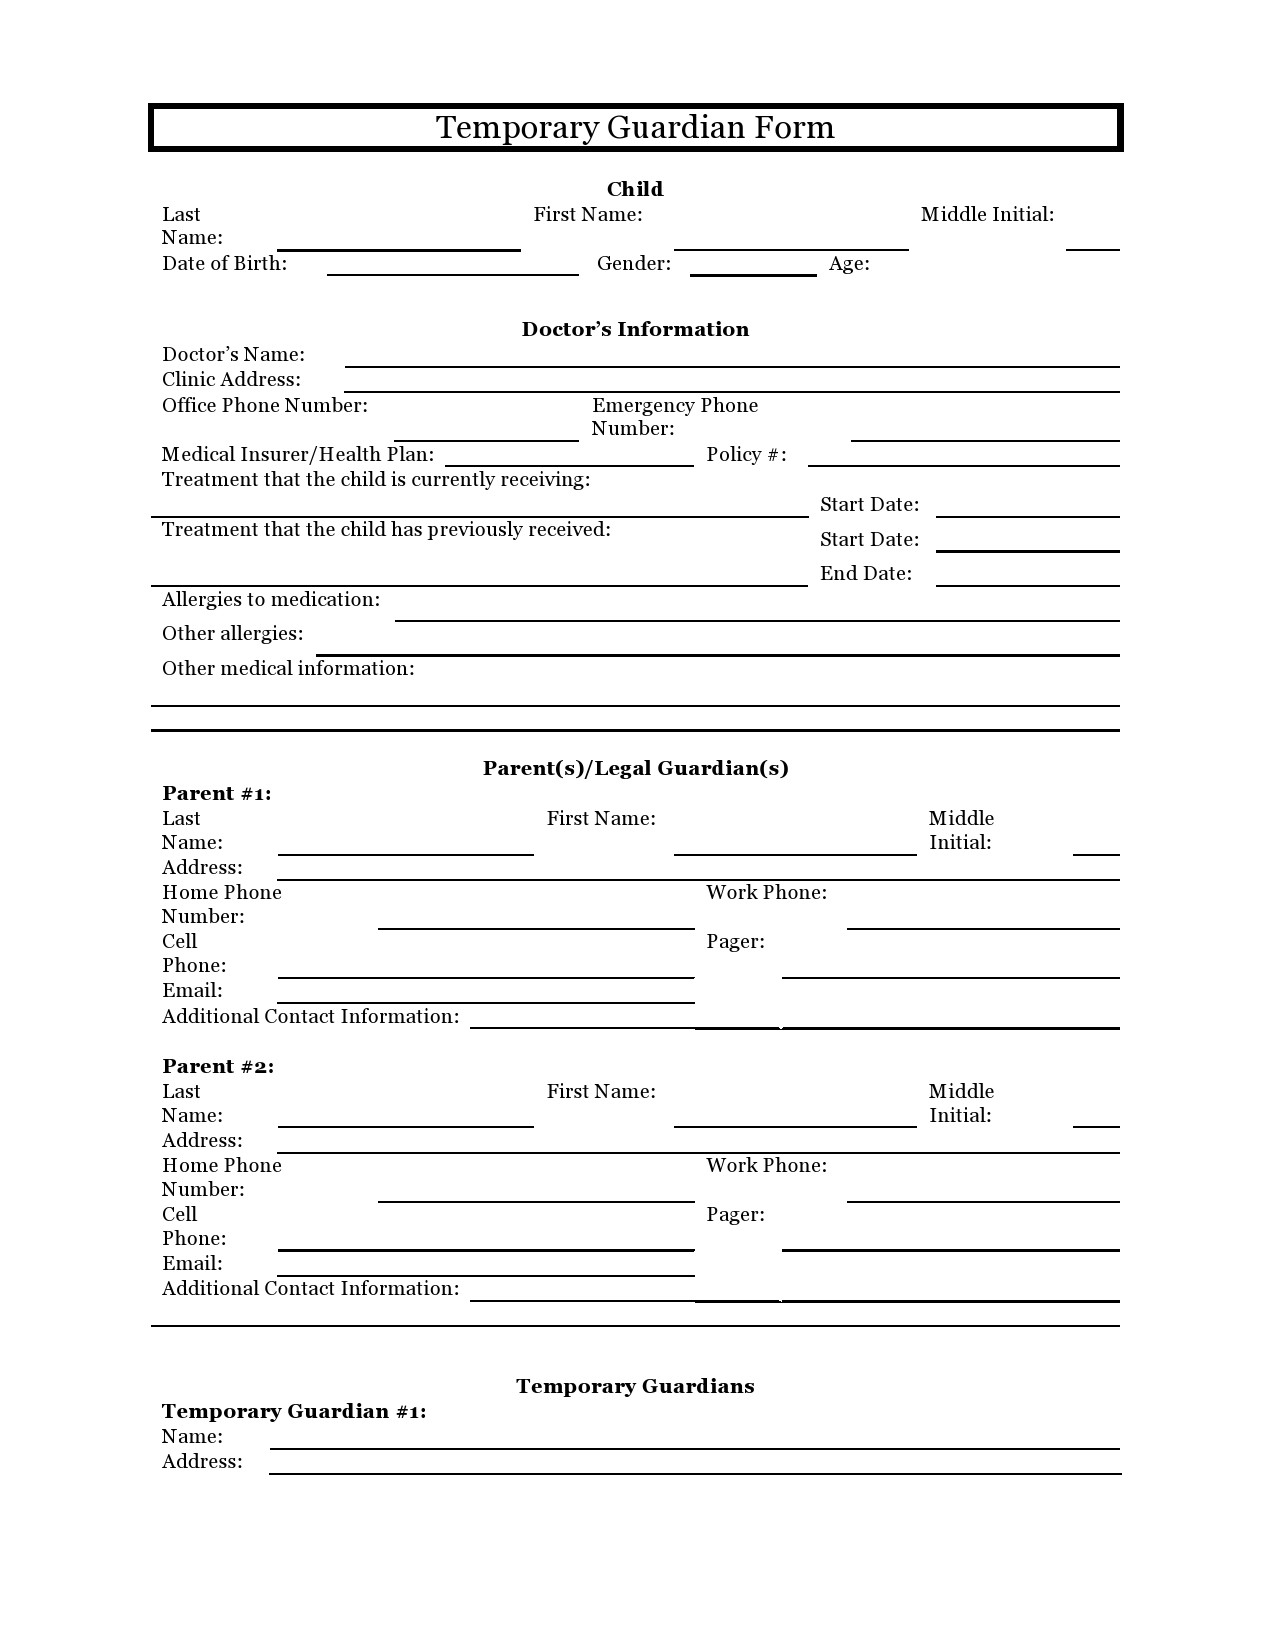 40 Printable Temporary Guardianship Forms All States 